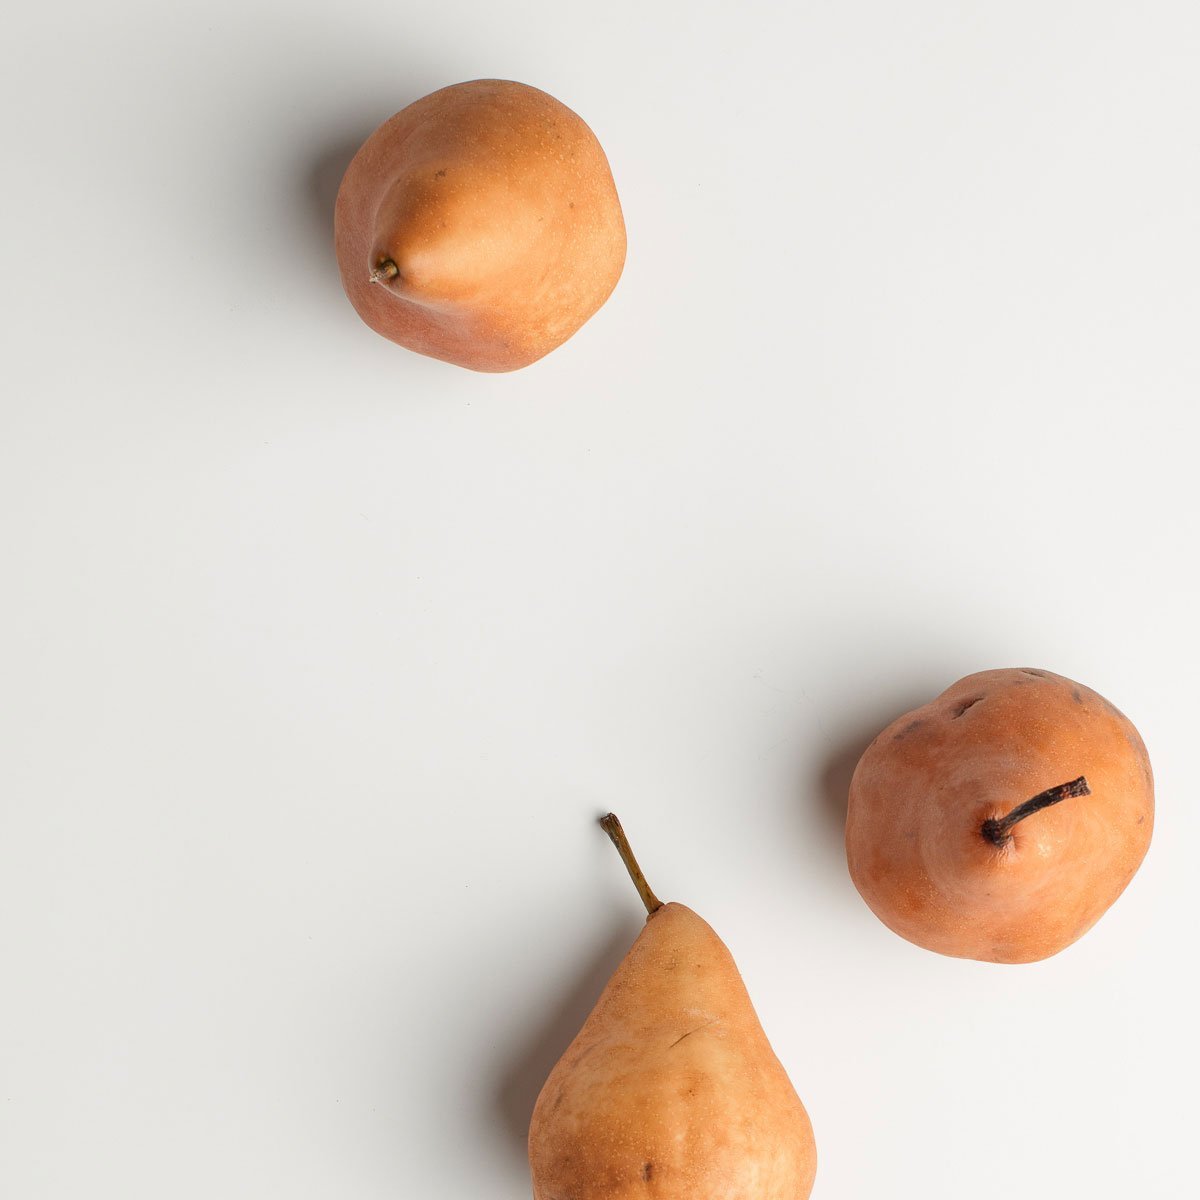 How does posting a random fruit as a Facebook status help raise awareness of breast cancer?